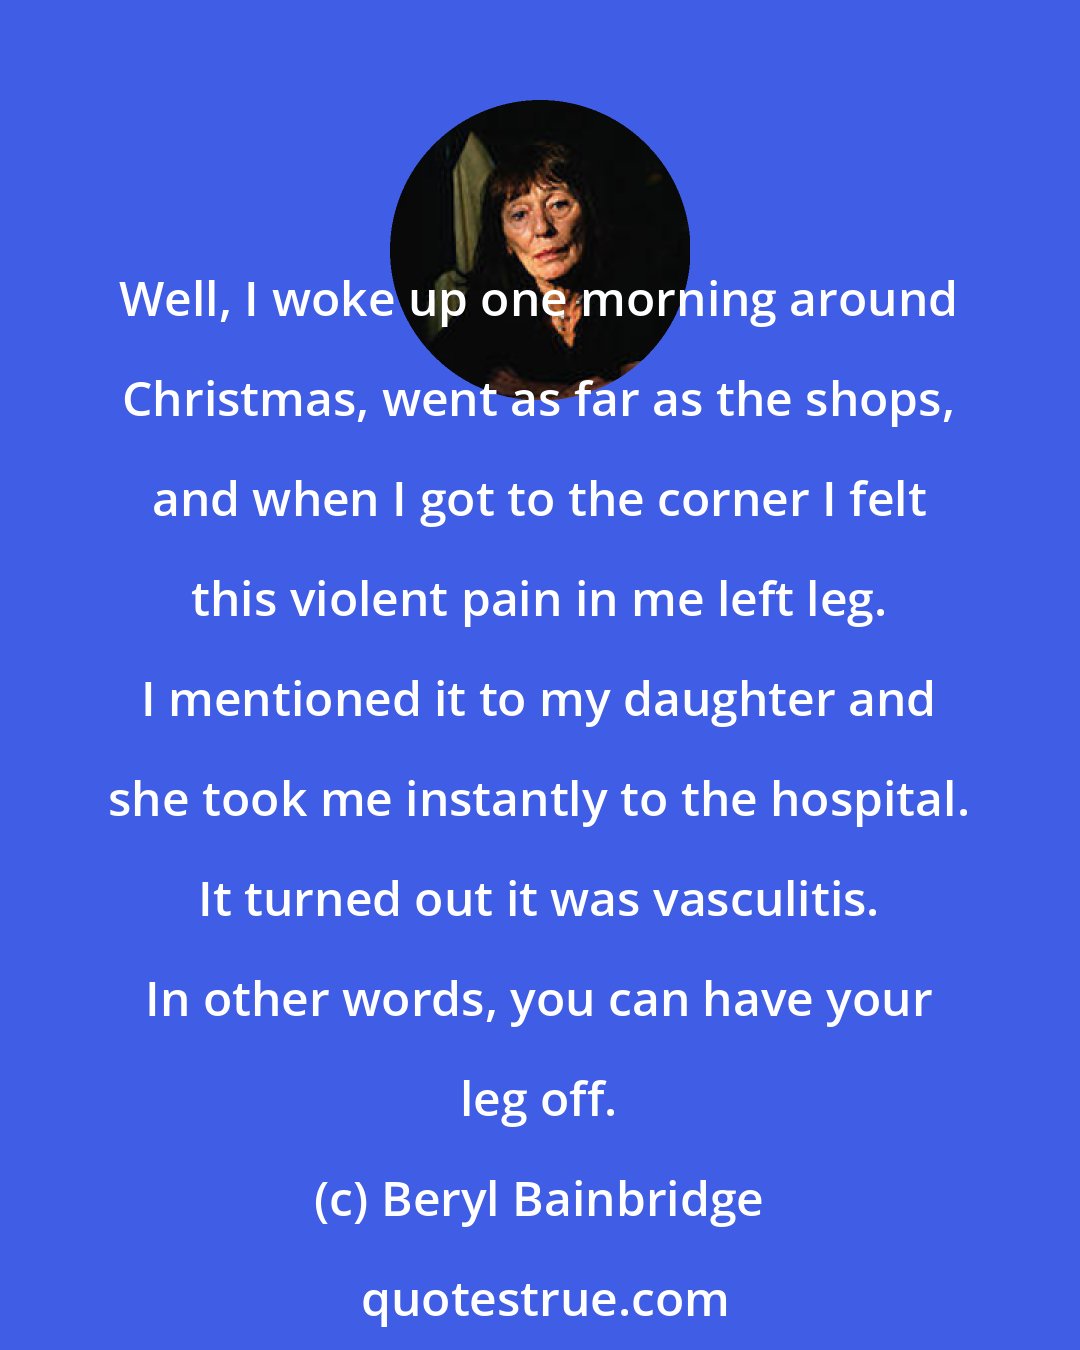 Beryl Bainbridge: Well, I woke up one morning around Christmas, went as far as the shops, and when I got to the corner I felt this violent pain in me left leg. I mentioned it to my daughter and she took me instantly to the hospital. It turned out it was vasculitis. In other words, you can have your leg off.